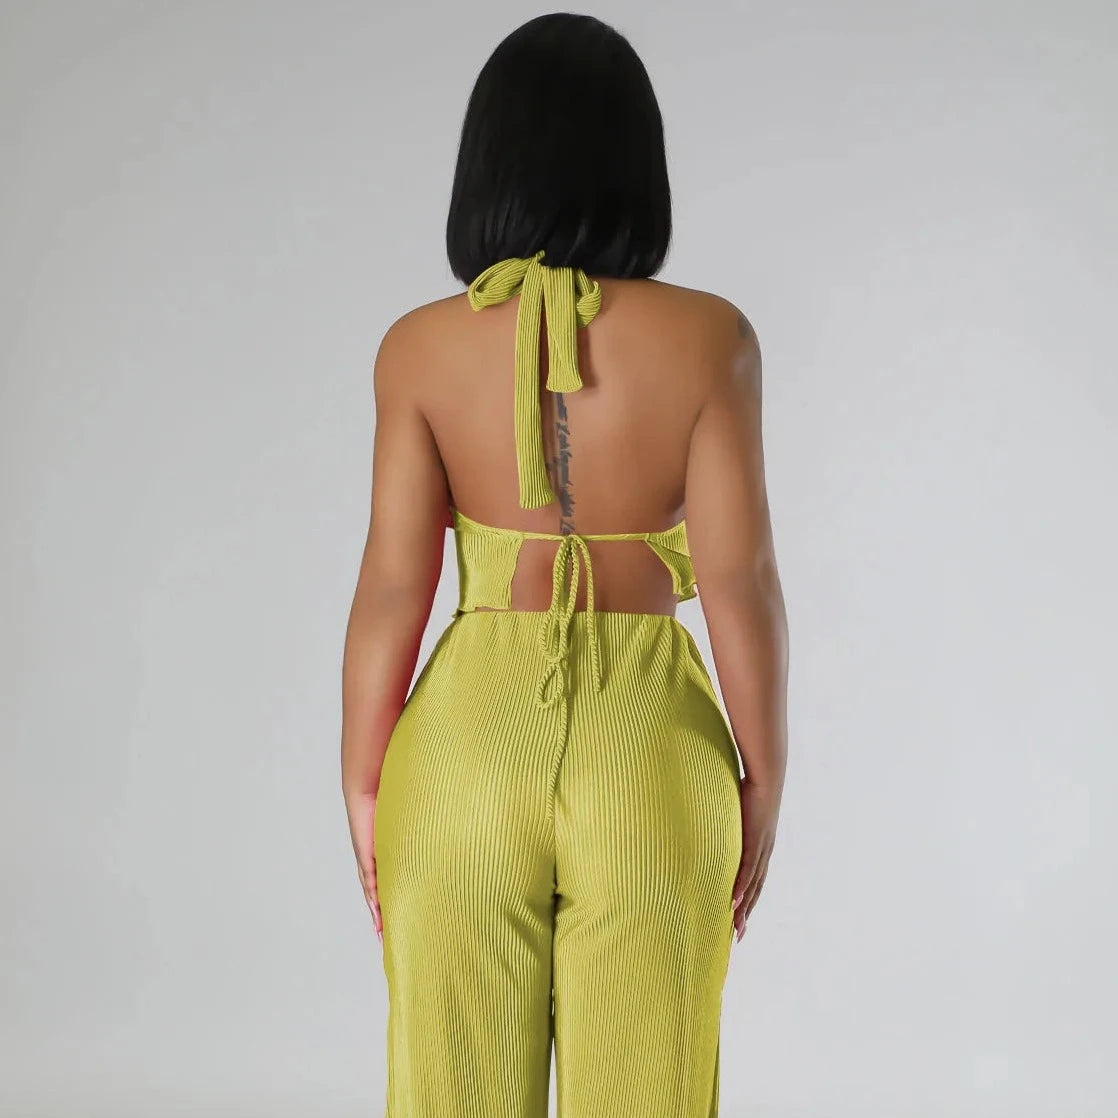 Backless Crop Top And Slit Cut Pants - Verostyle